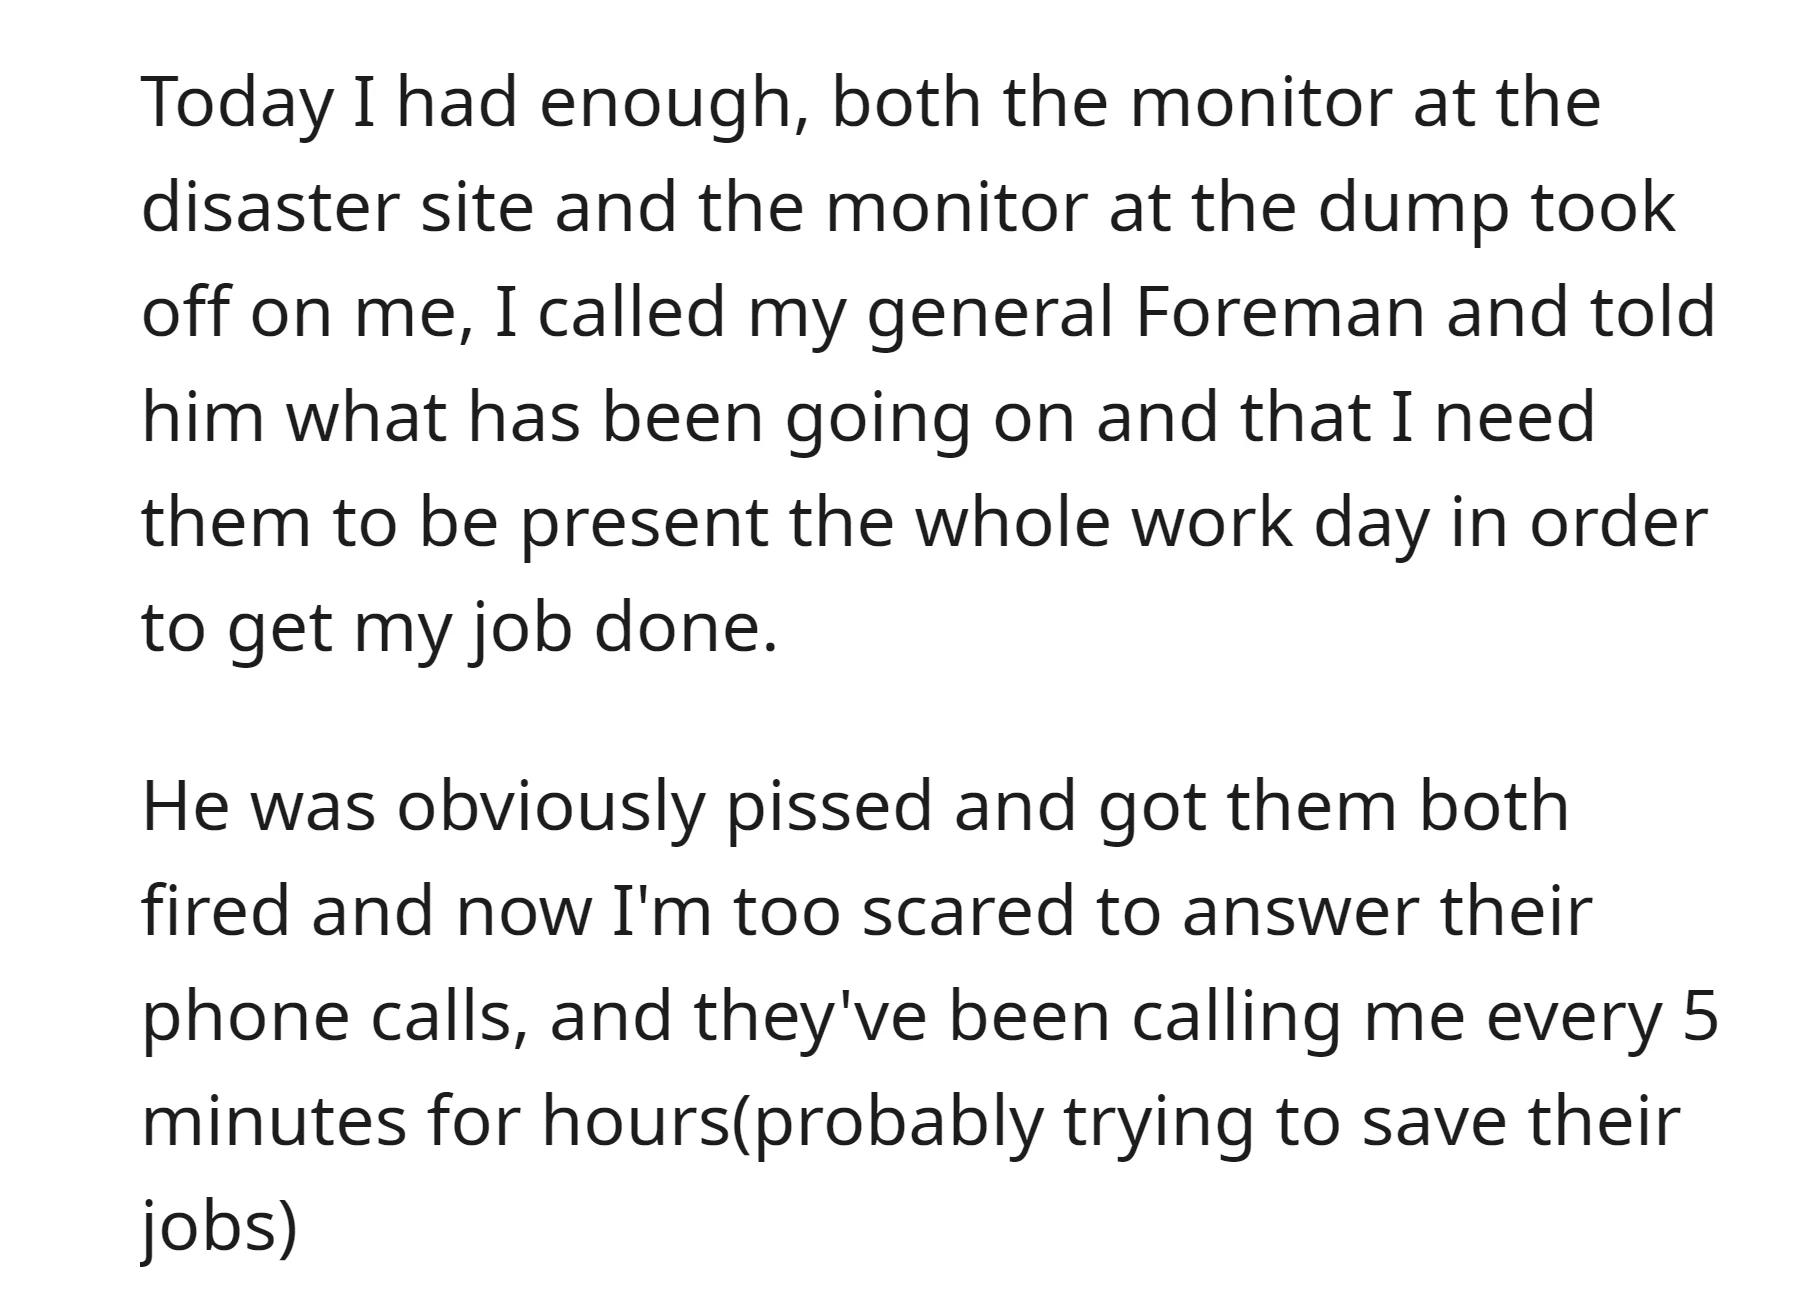 OP informed their general foreman about that, and the monitors got fired